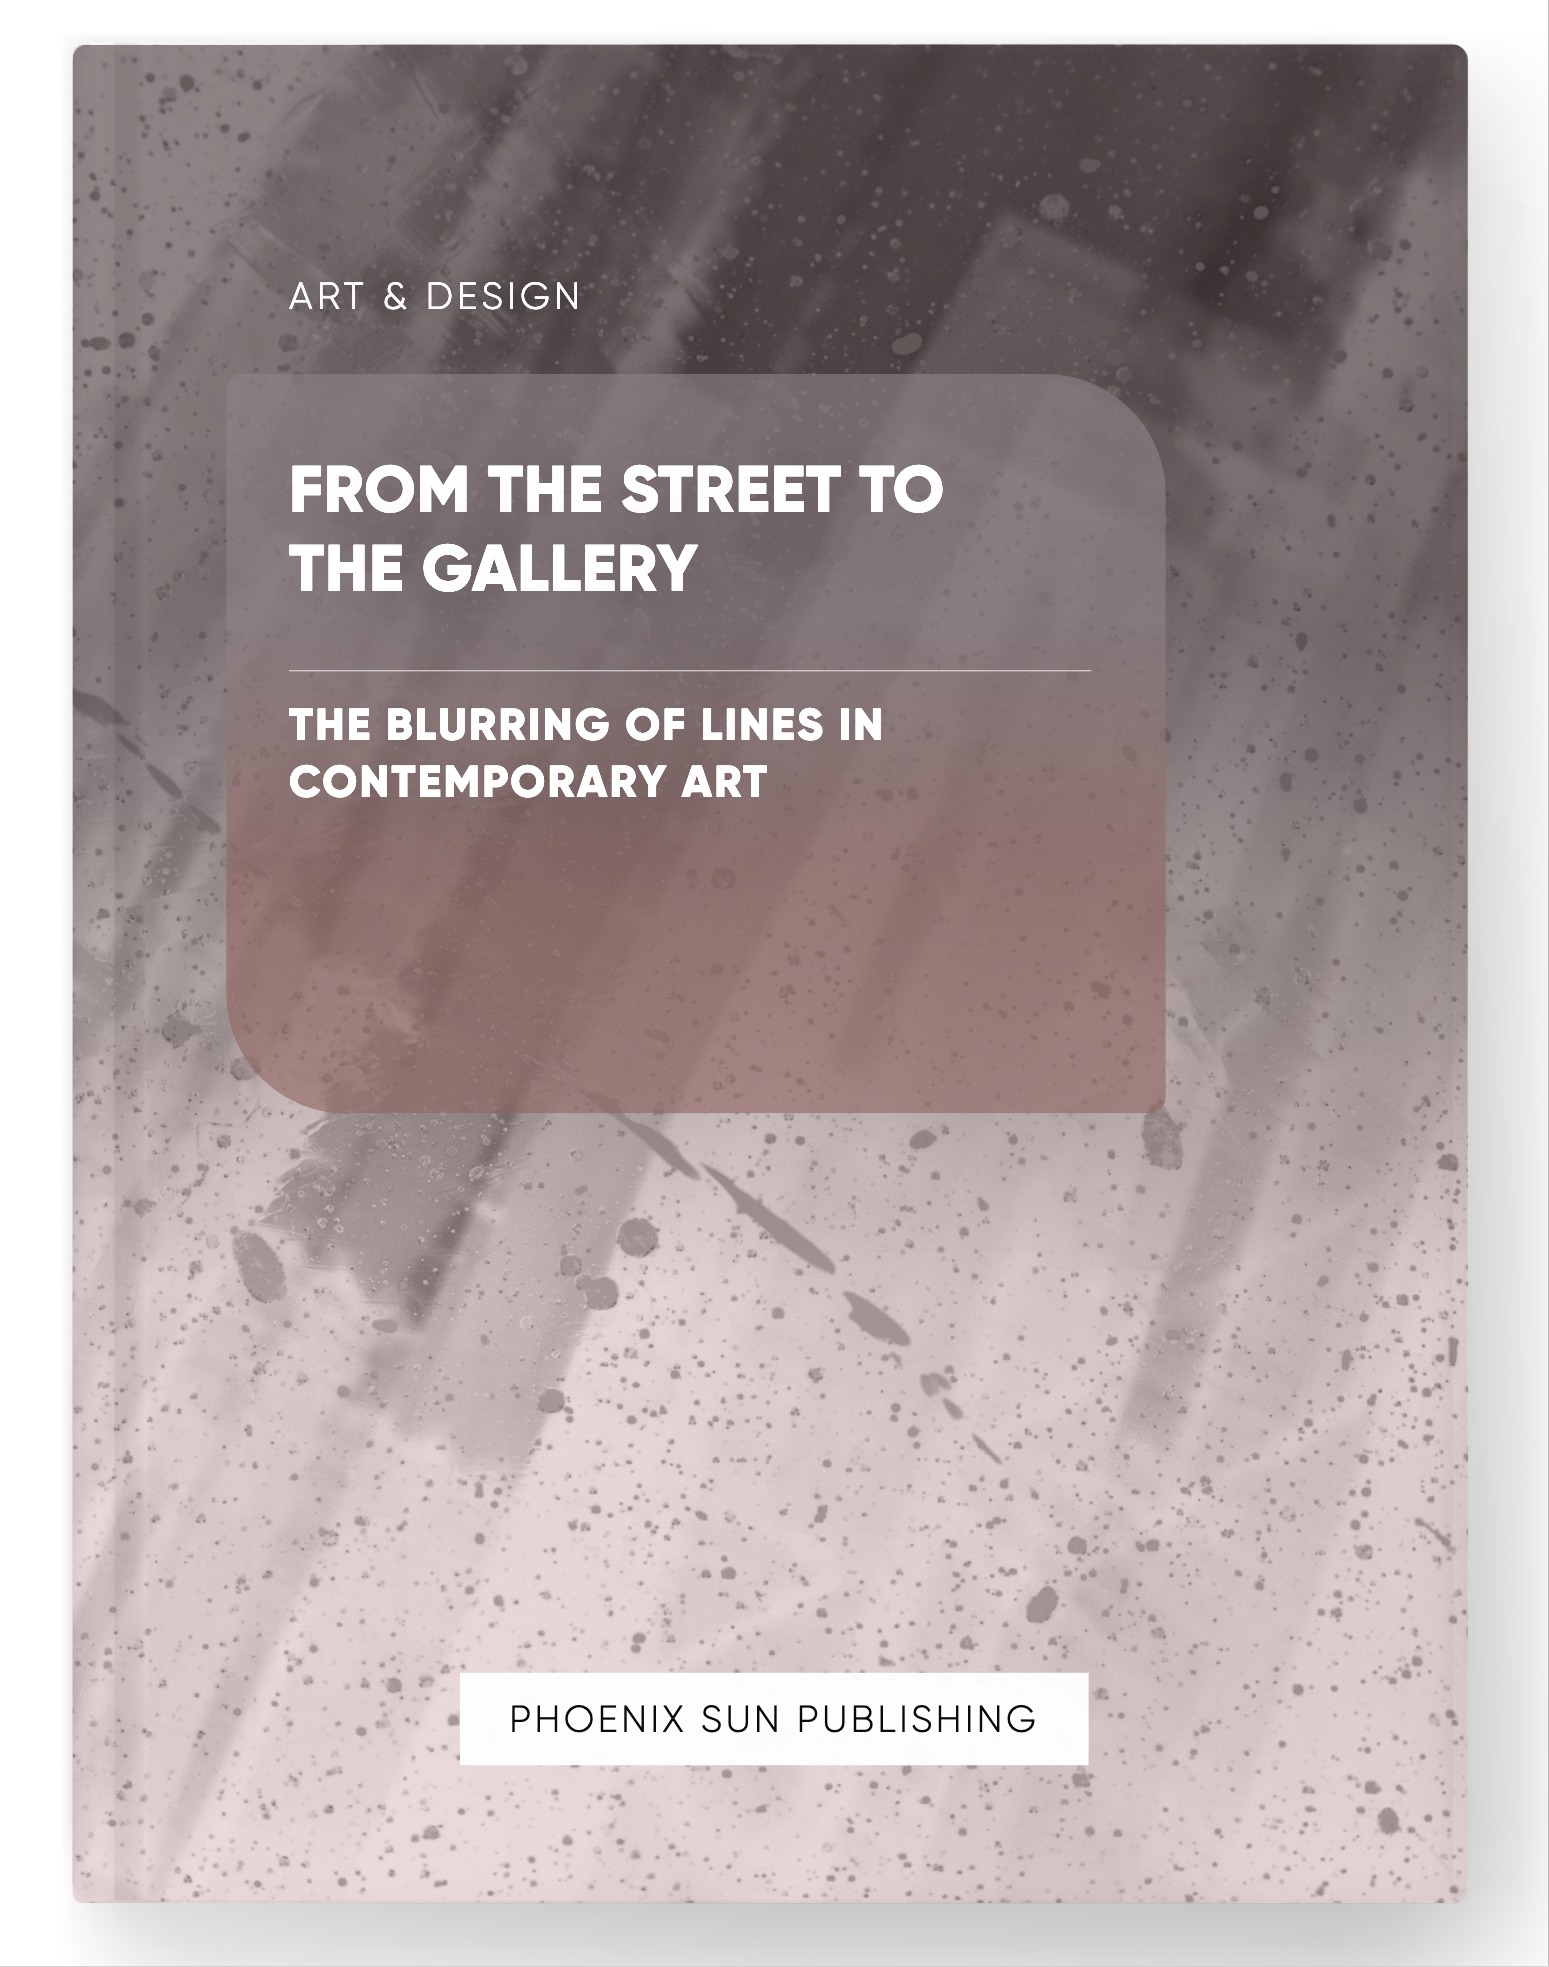 From the Street to the Gallery – The Blurring of Lines in Contemporary Art